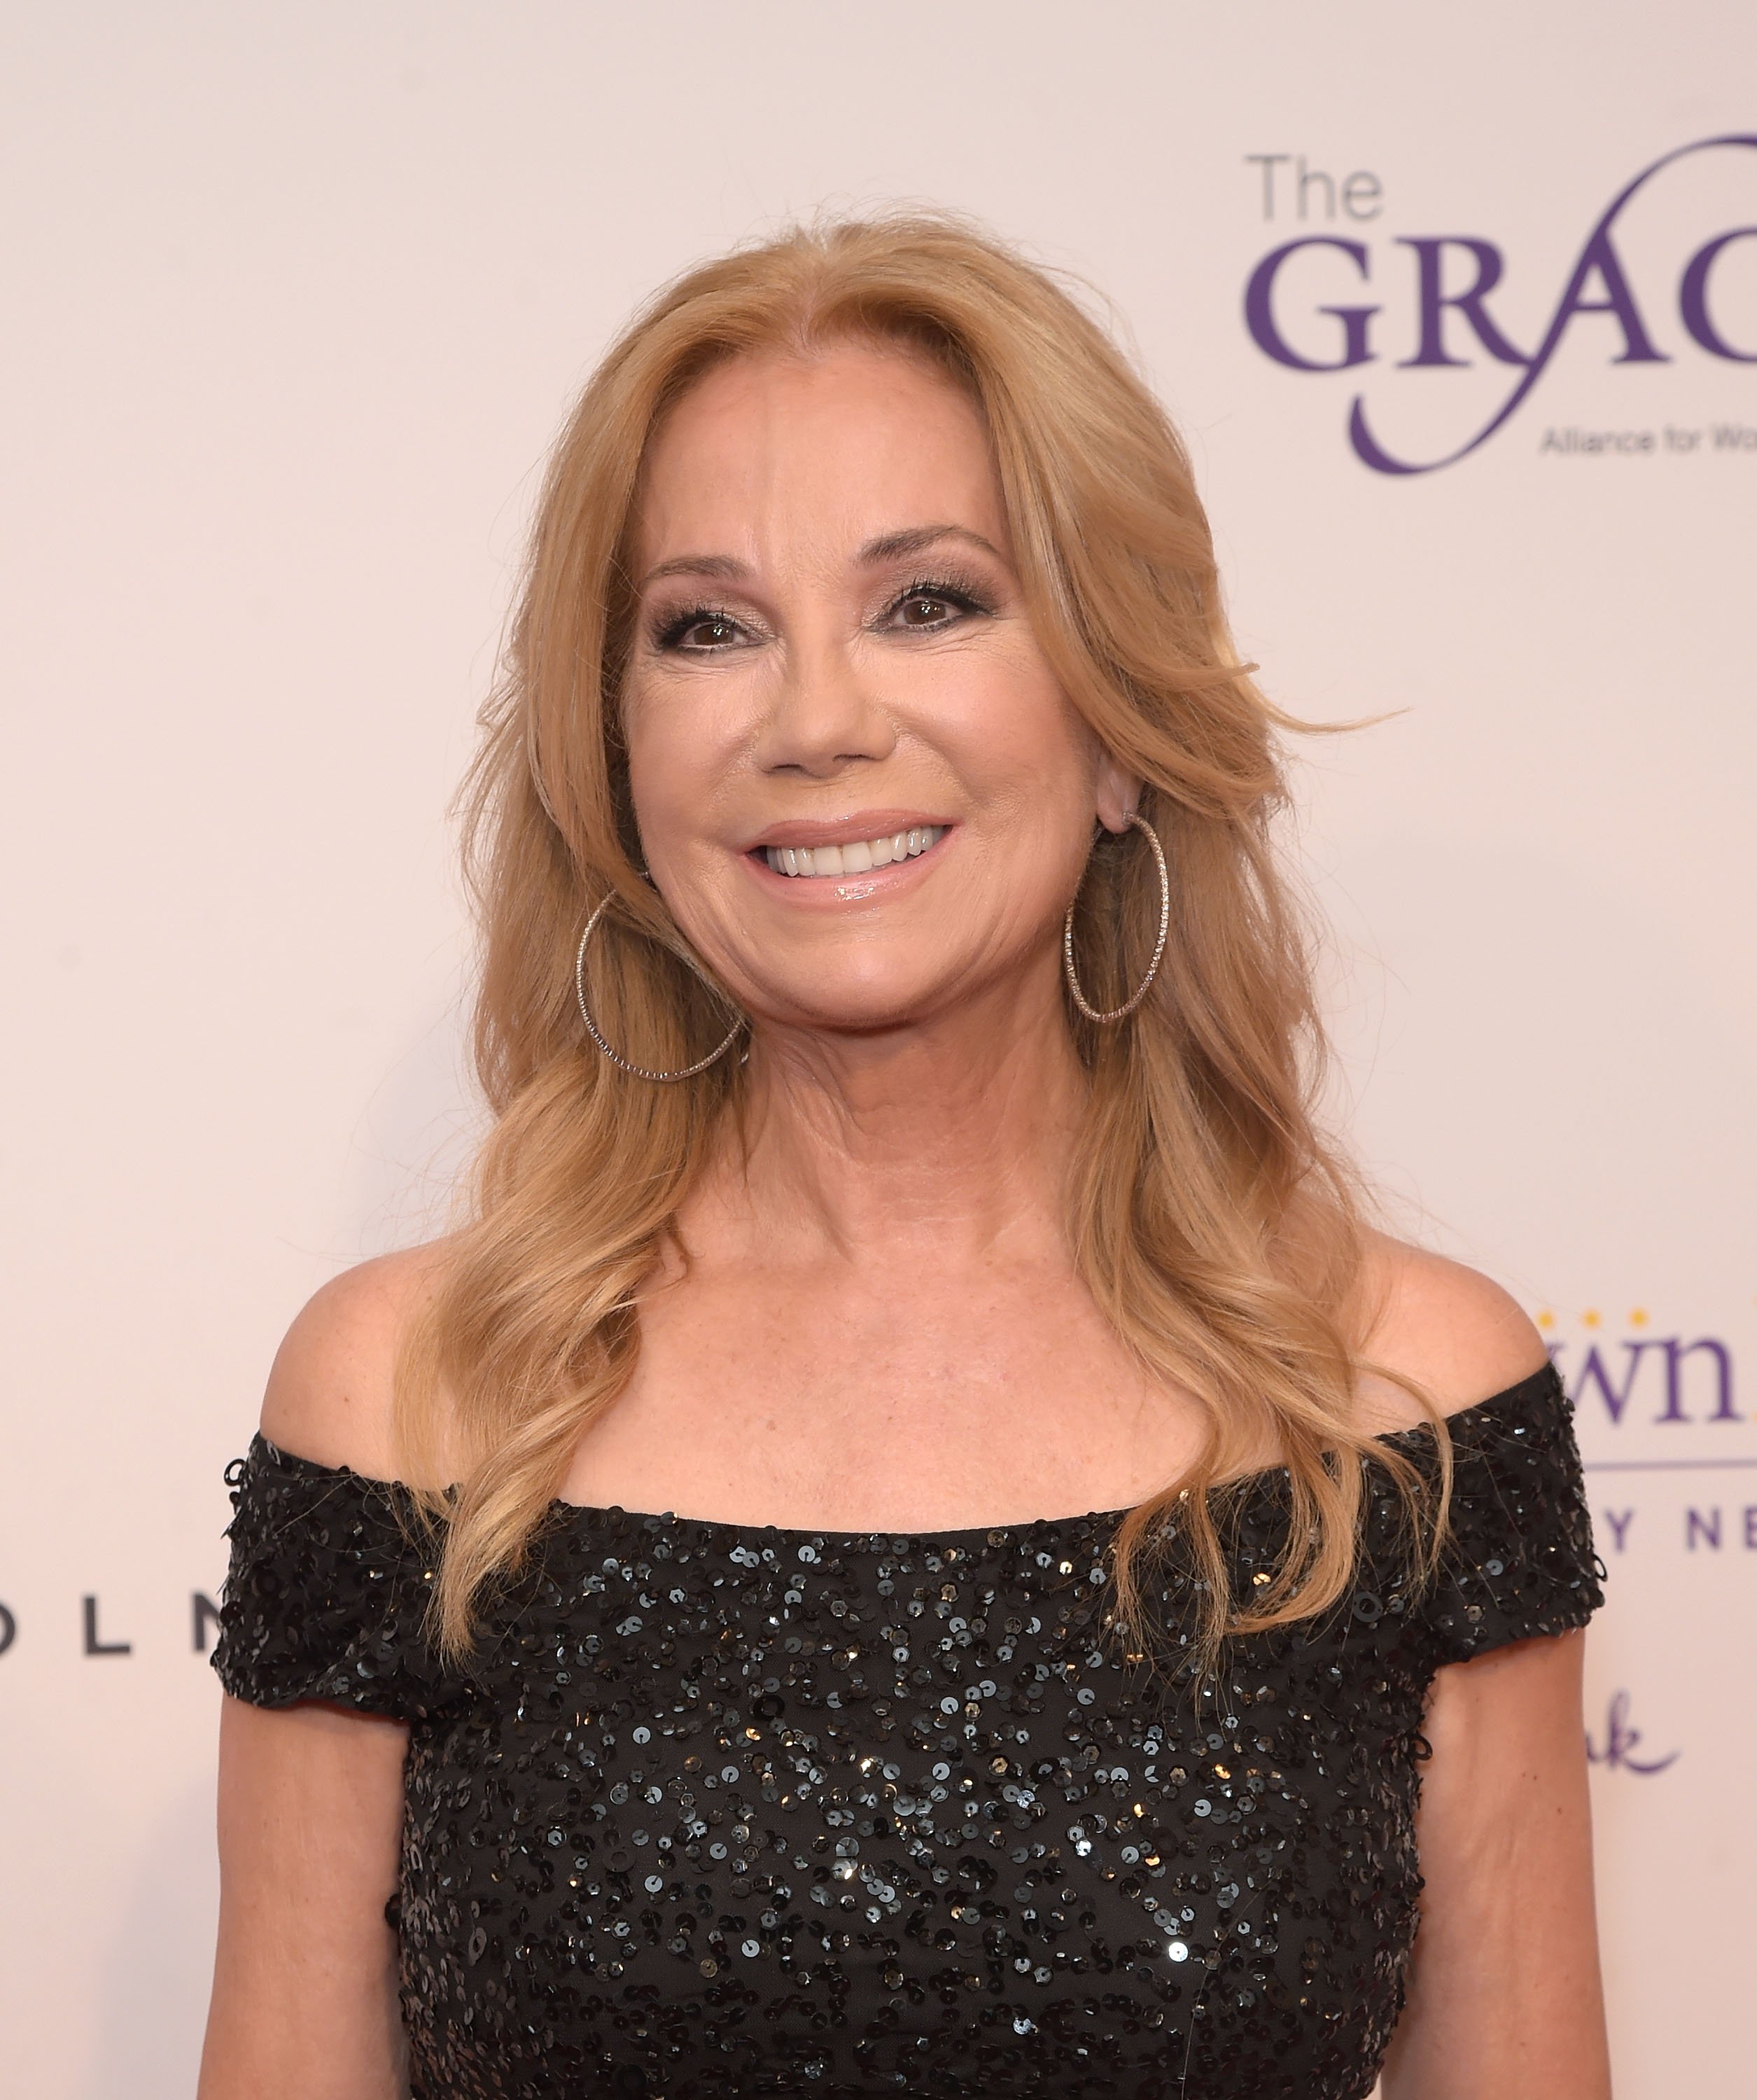 Kathie Lee Gifford pictured at the 41st Annual Gracie Awards Gala, 2016, Beverly Hill, California. | Photo: Getty Images